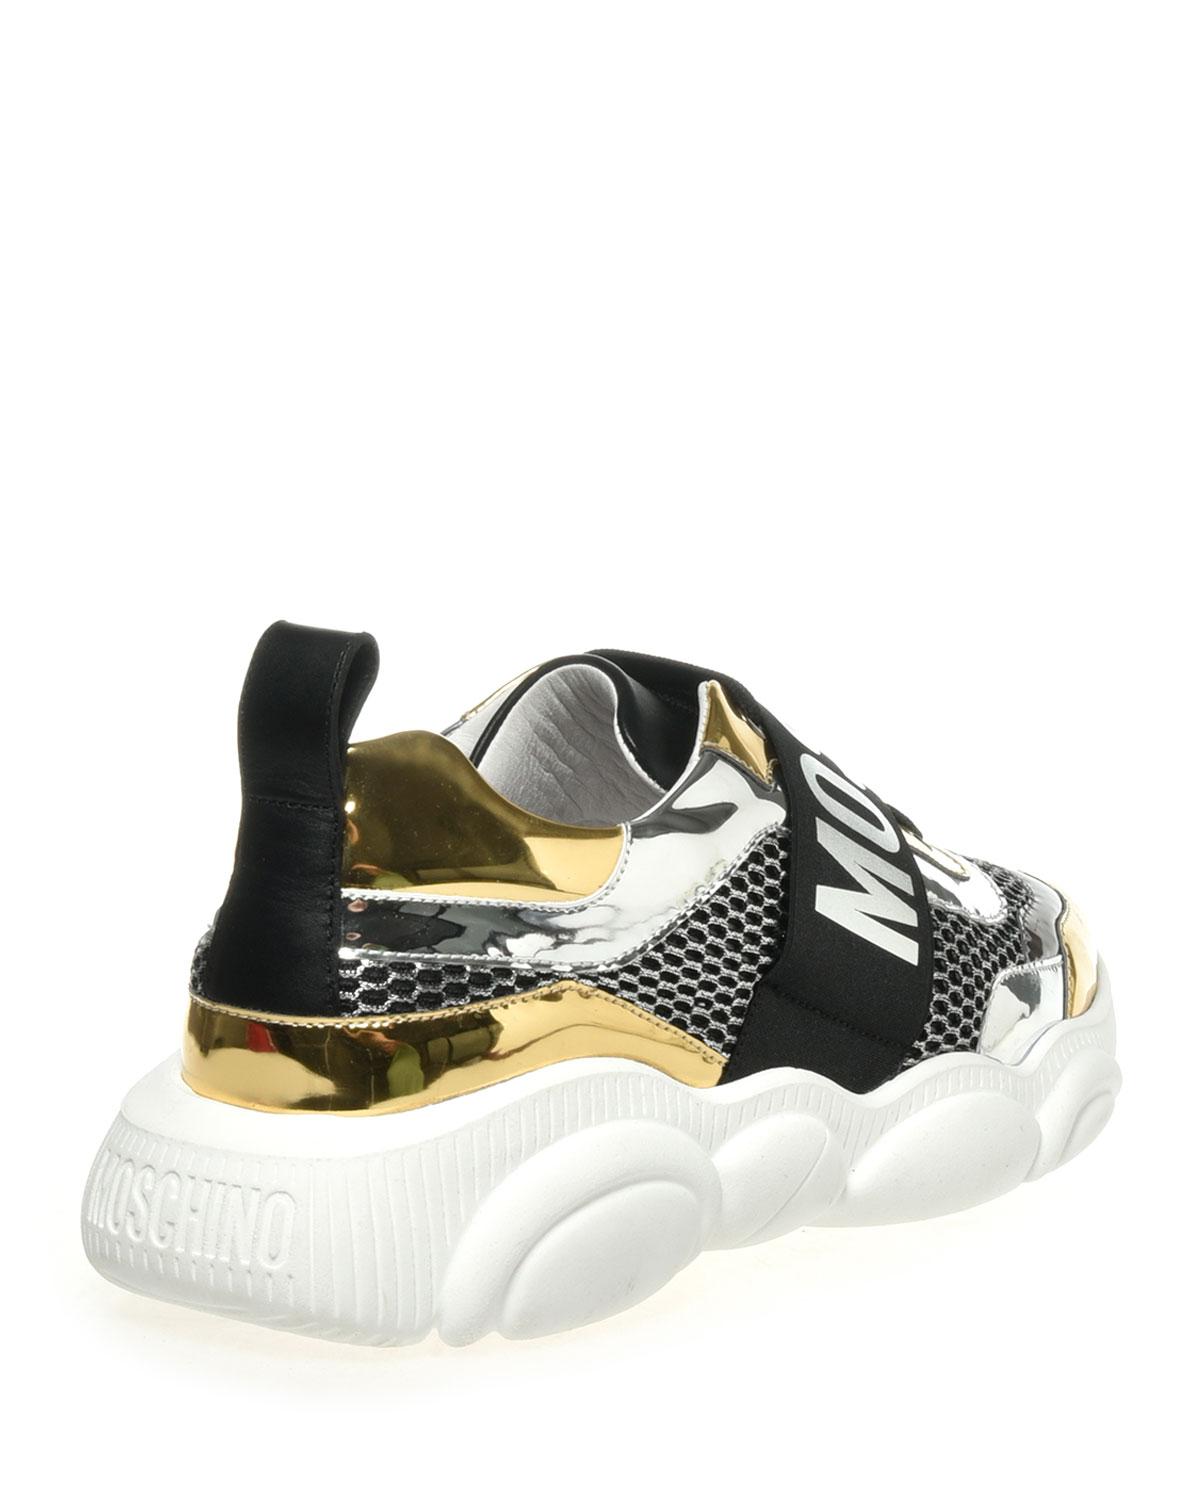 Moschino Leather Teddy Low-top Sneakers in Silver (Metallic) for Men - Lyst